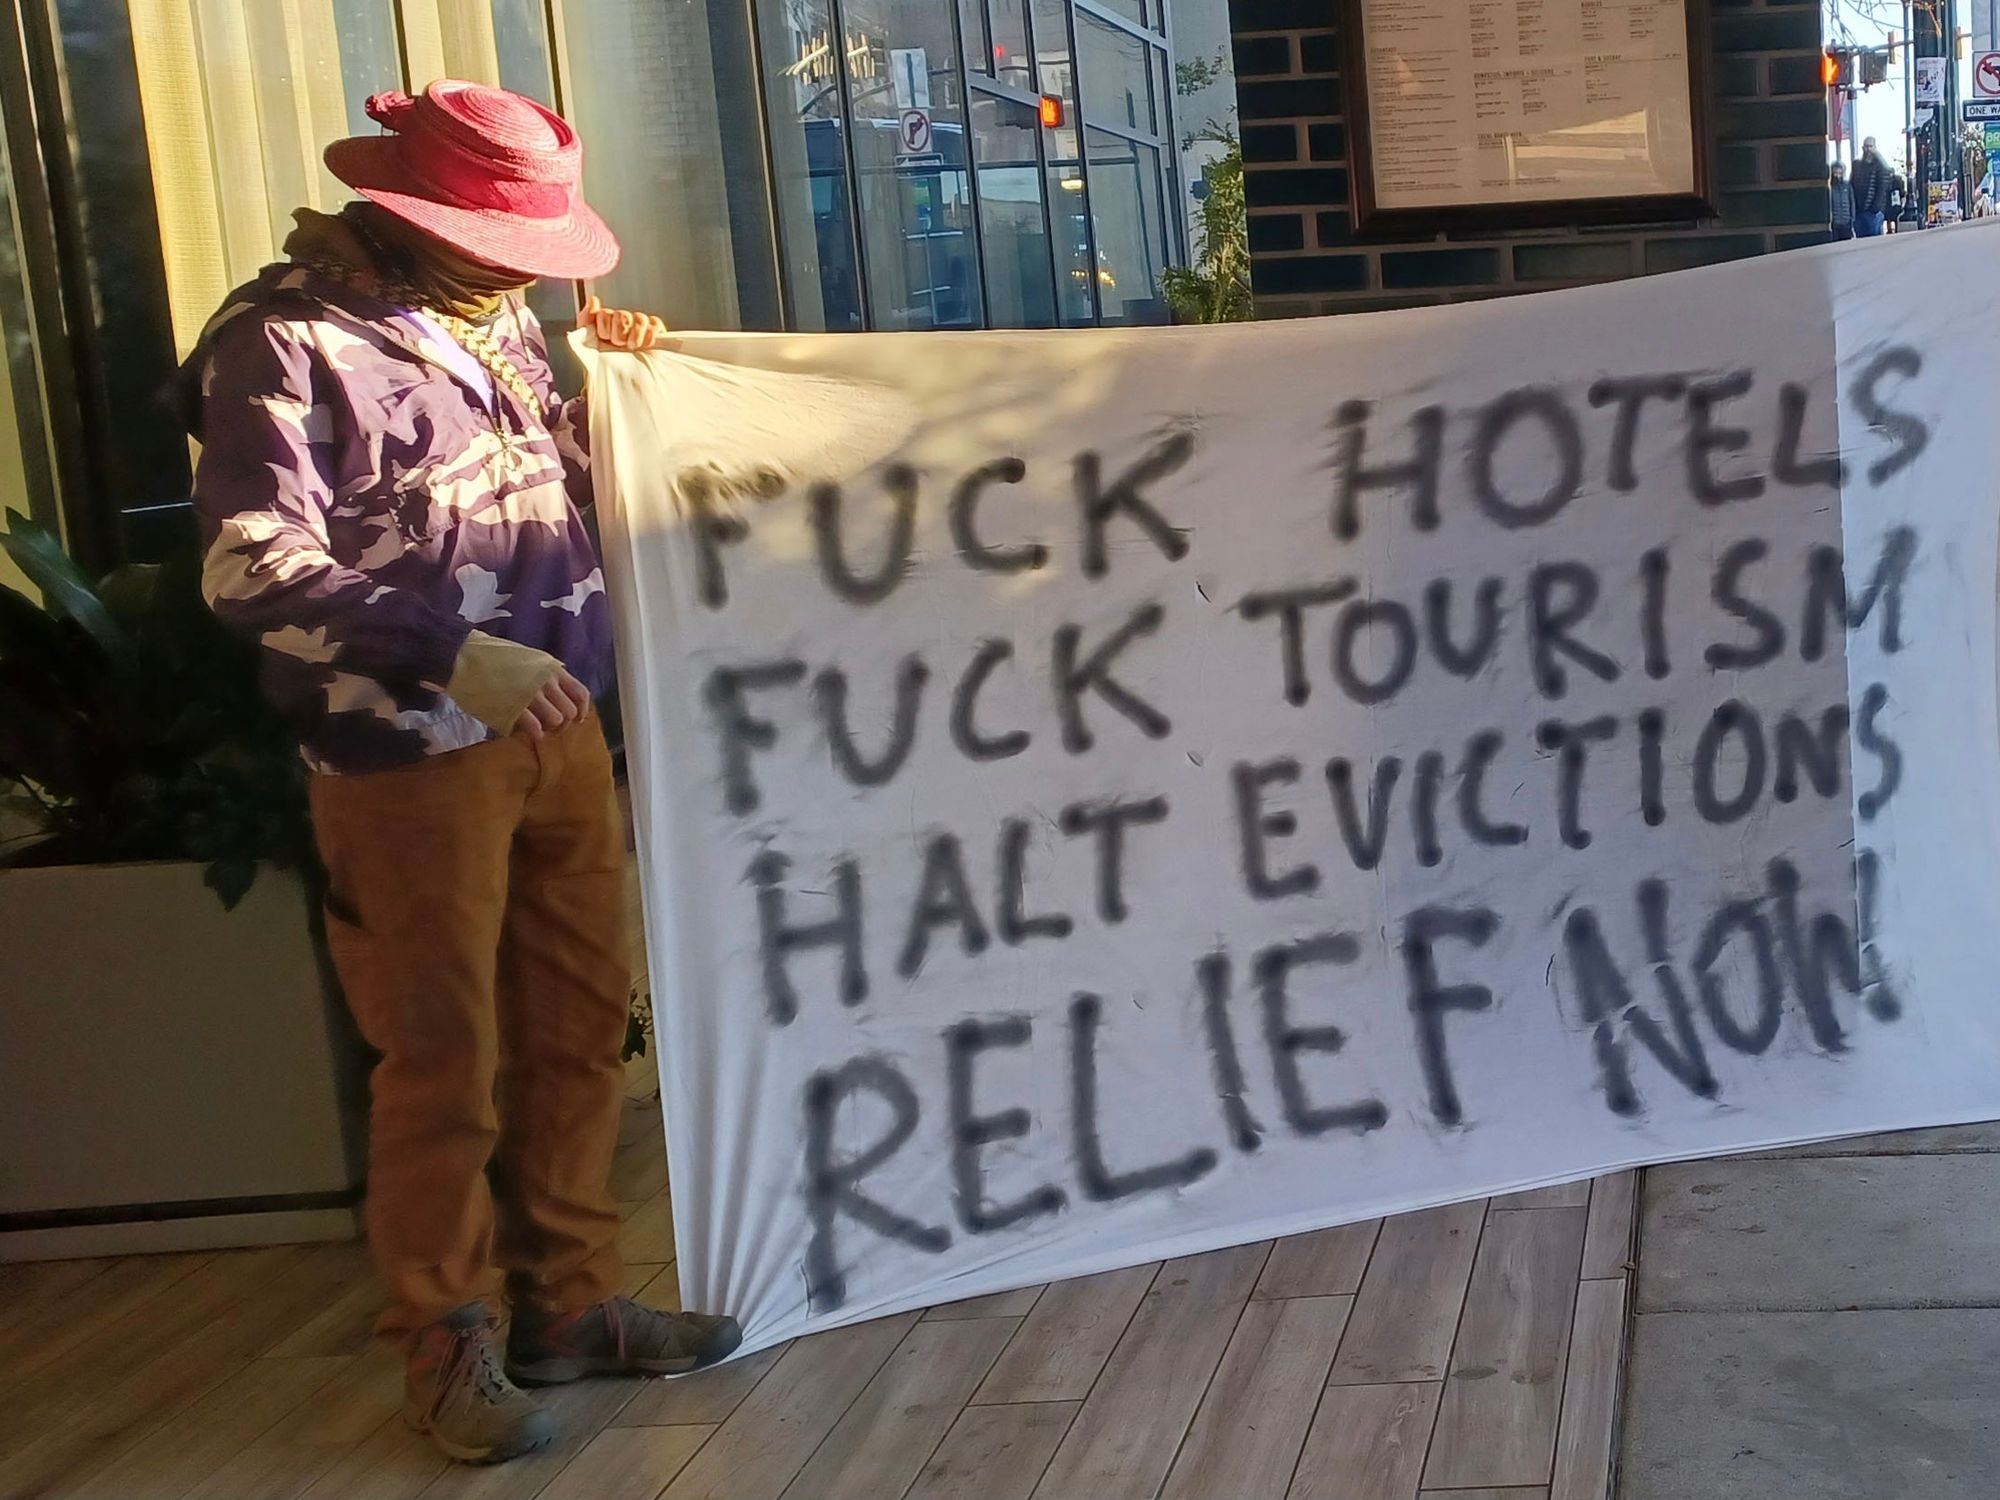 One person, with their face obscured by a broad sun hat, standing in front of a hotel holding a banner that reads reads "Fuck Hotels, Fuck Tourism, Halt Evictions, Relief Now"